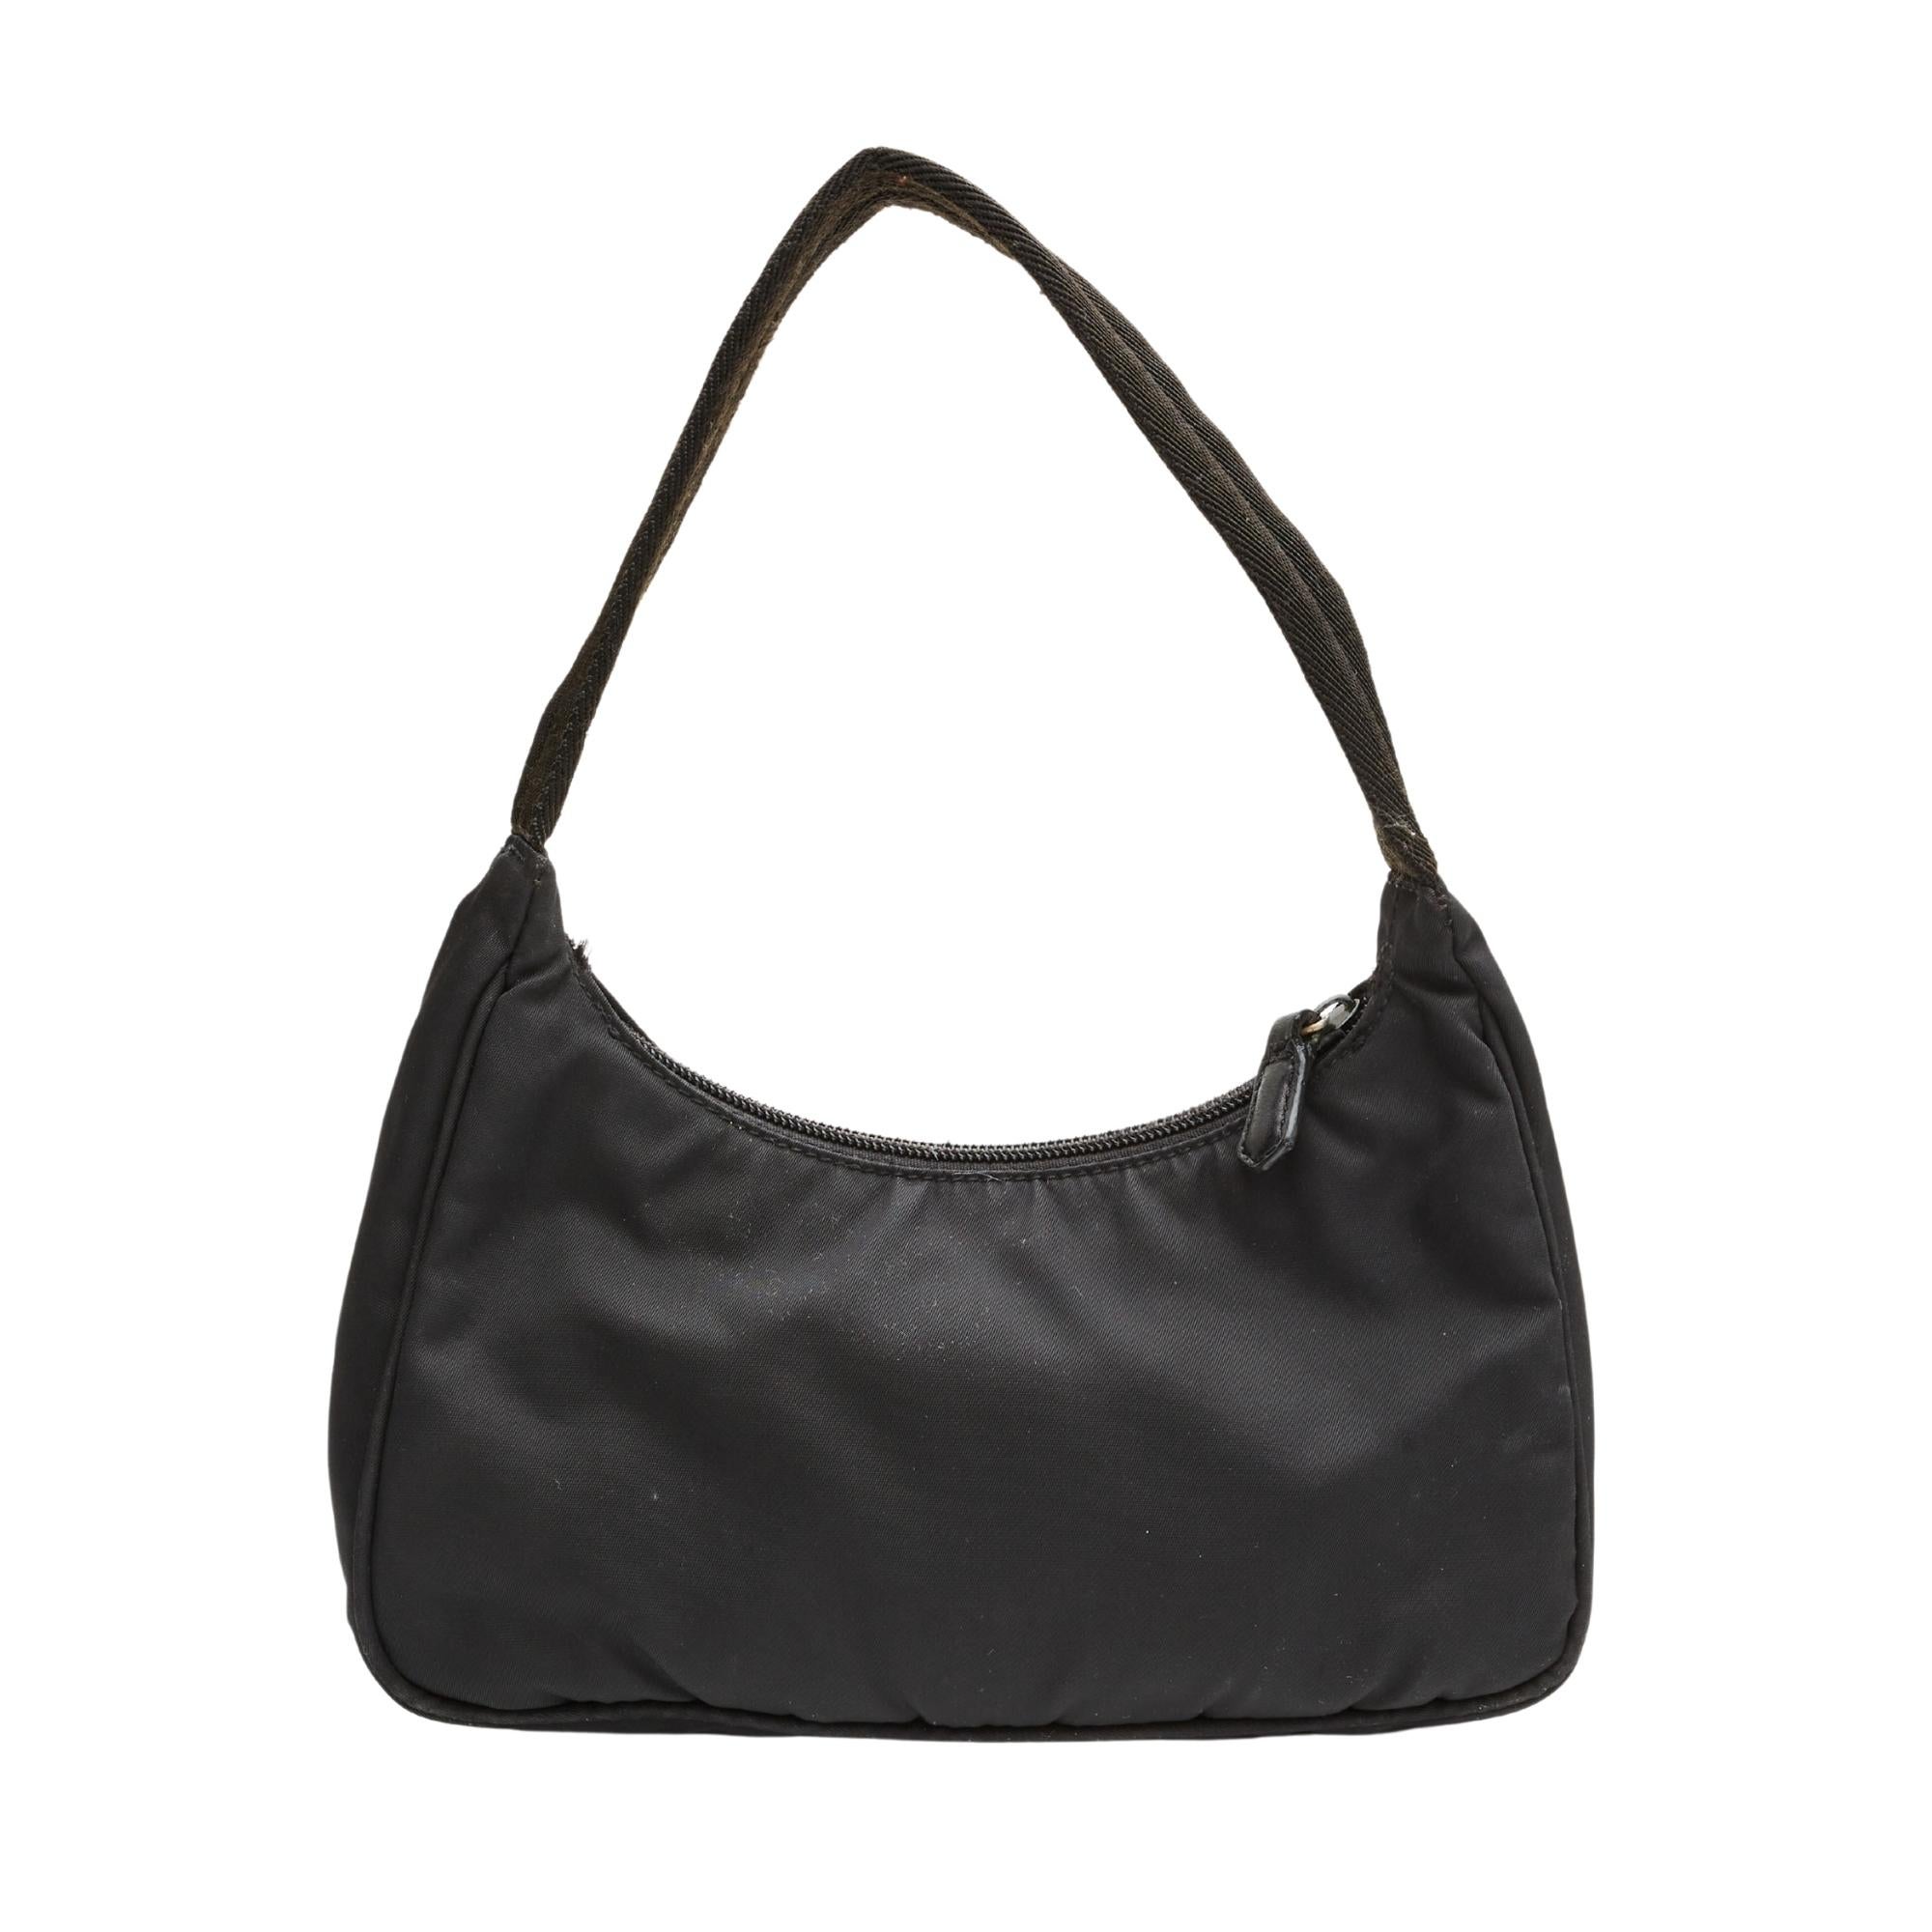 Prada mini bag made with nylon in a hobo style. Featuring zip zip closure, black woven fabric looping shoulder strap and black lining.

COLOR: Black
MATERIAL: Nylon
ITEM CODE: 46
MEASURES: H 6” x L 9” x D 2.5”
DROP: 7”
COMES WITH: Dust